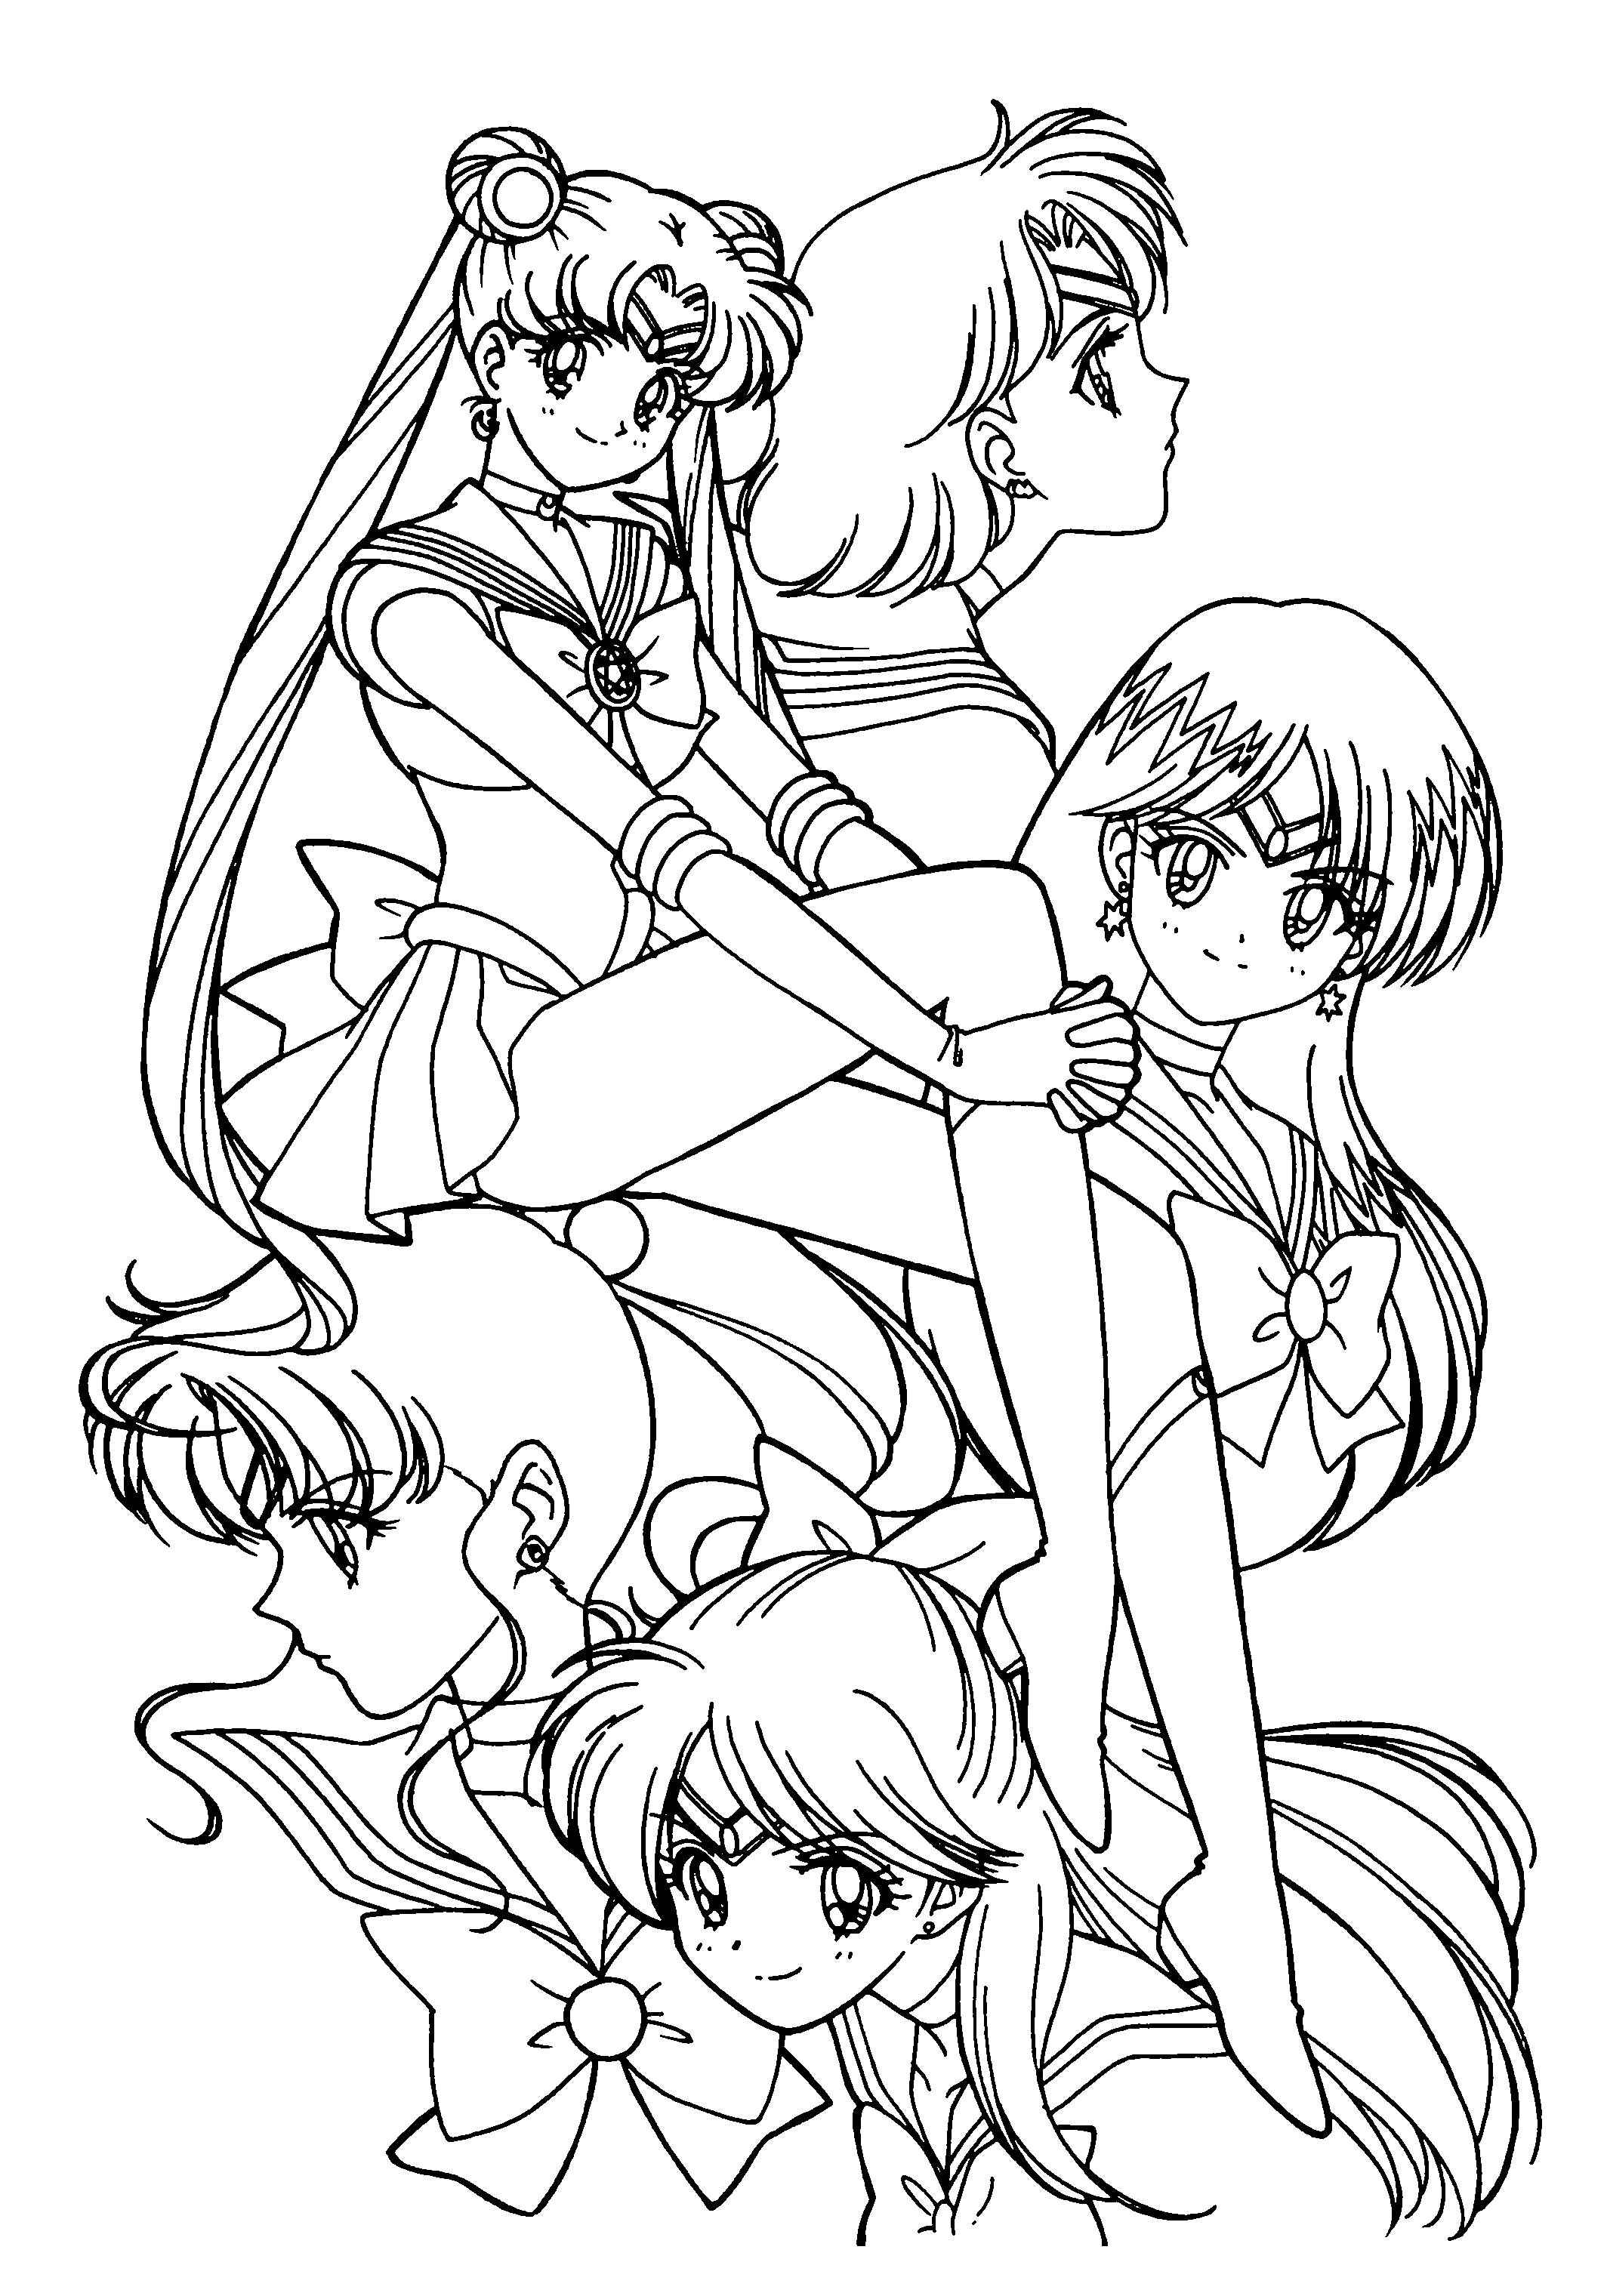 sailor-moon coloring page,printable,coloring pages